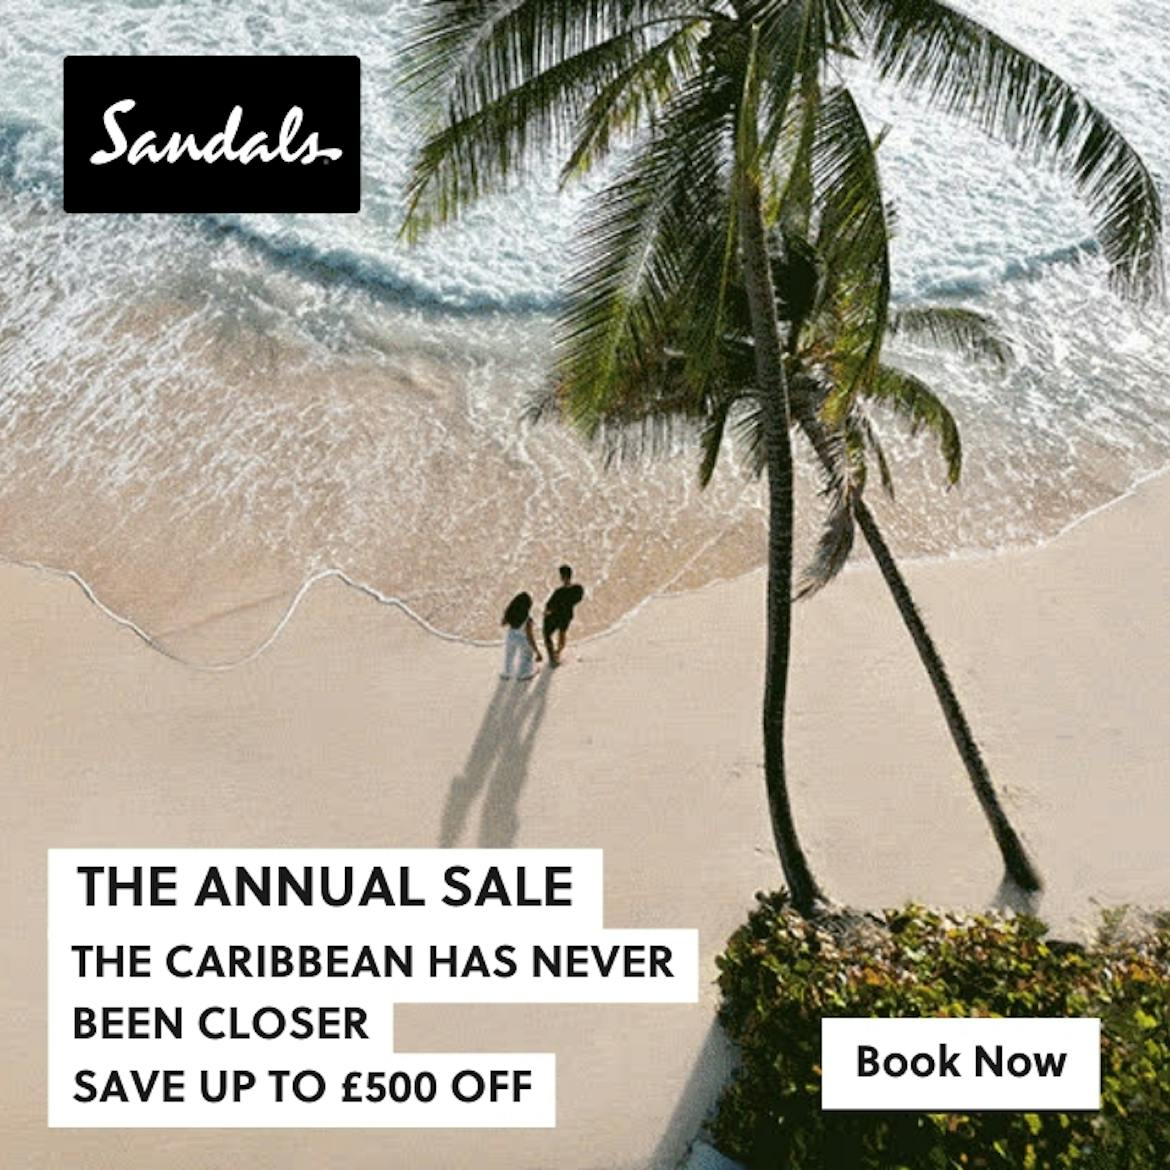 Up to £500 off in the annual sale